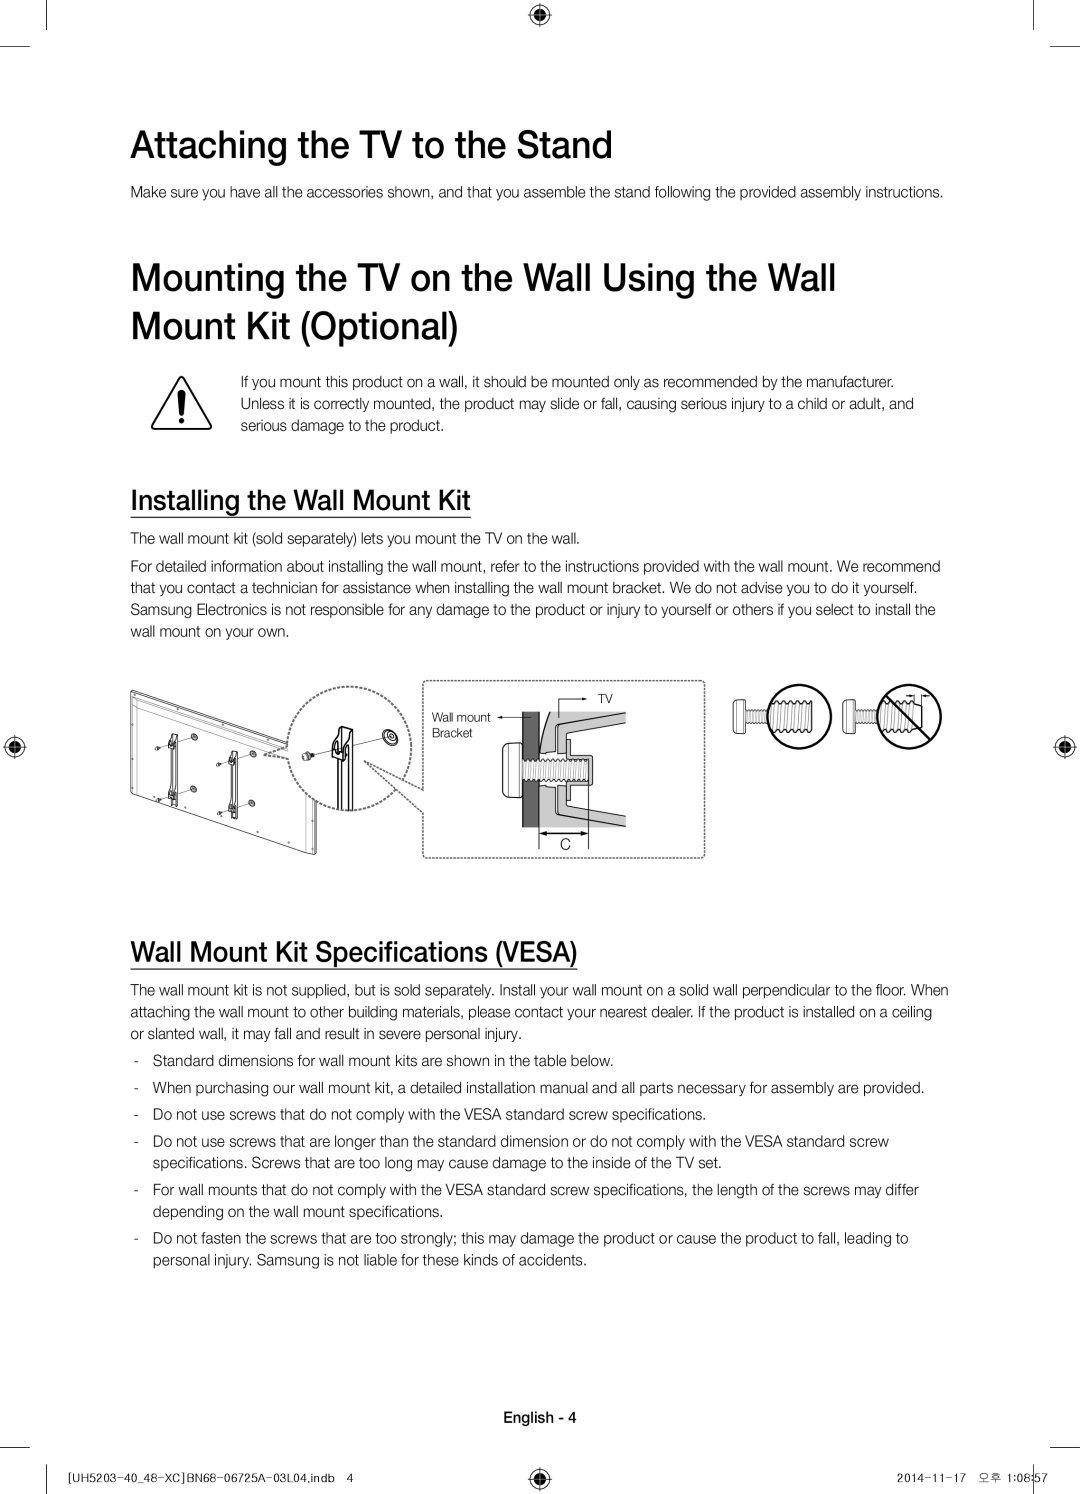 Samsung UE40H5203AWXXC manual Attaching the TV to the Stand, Mounting the TV on the Wall Using the Wall Mount Kit Optional 